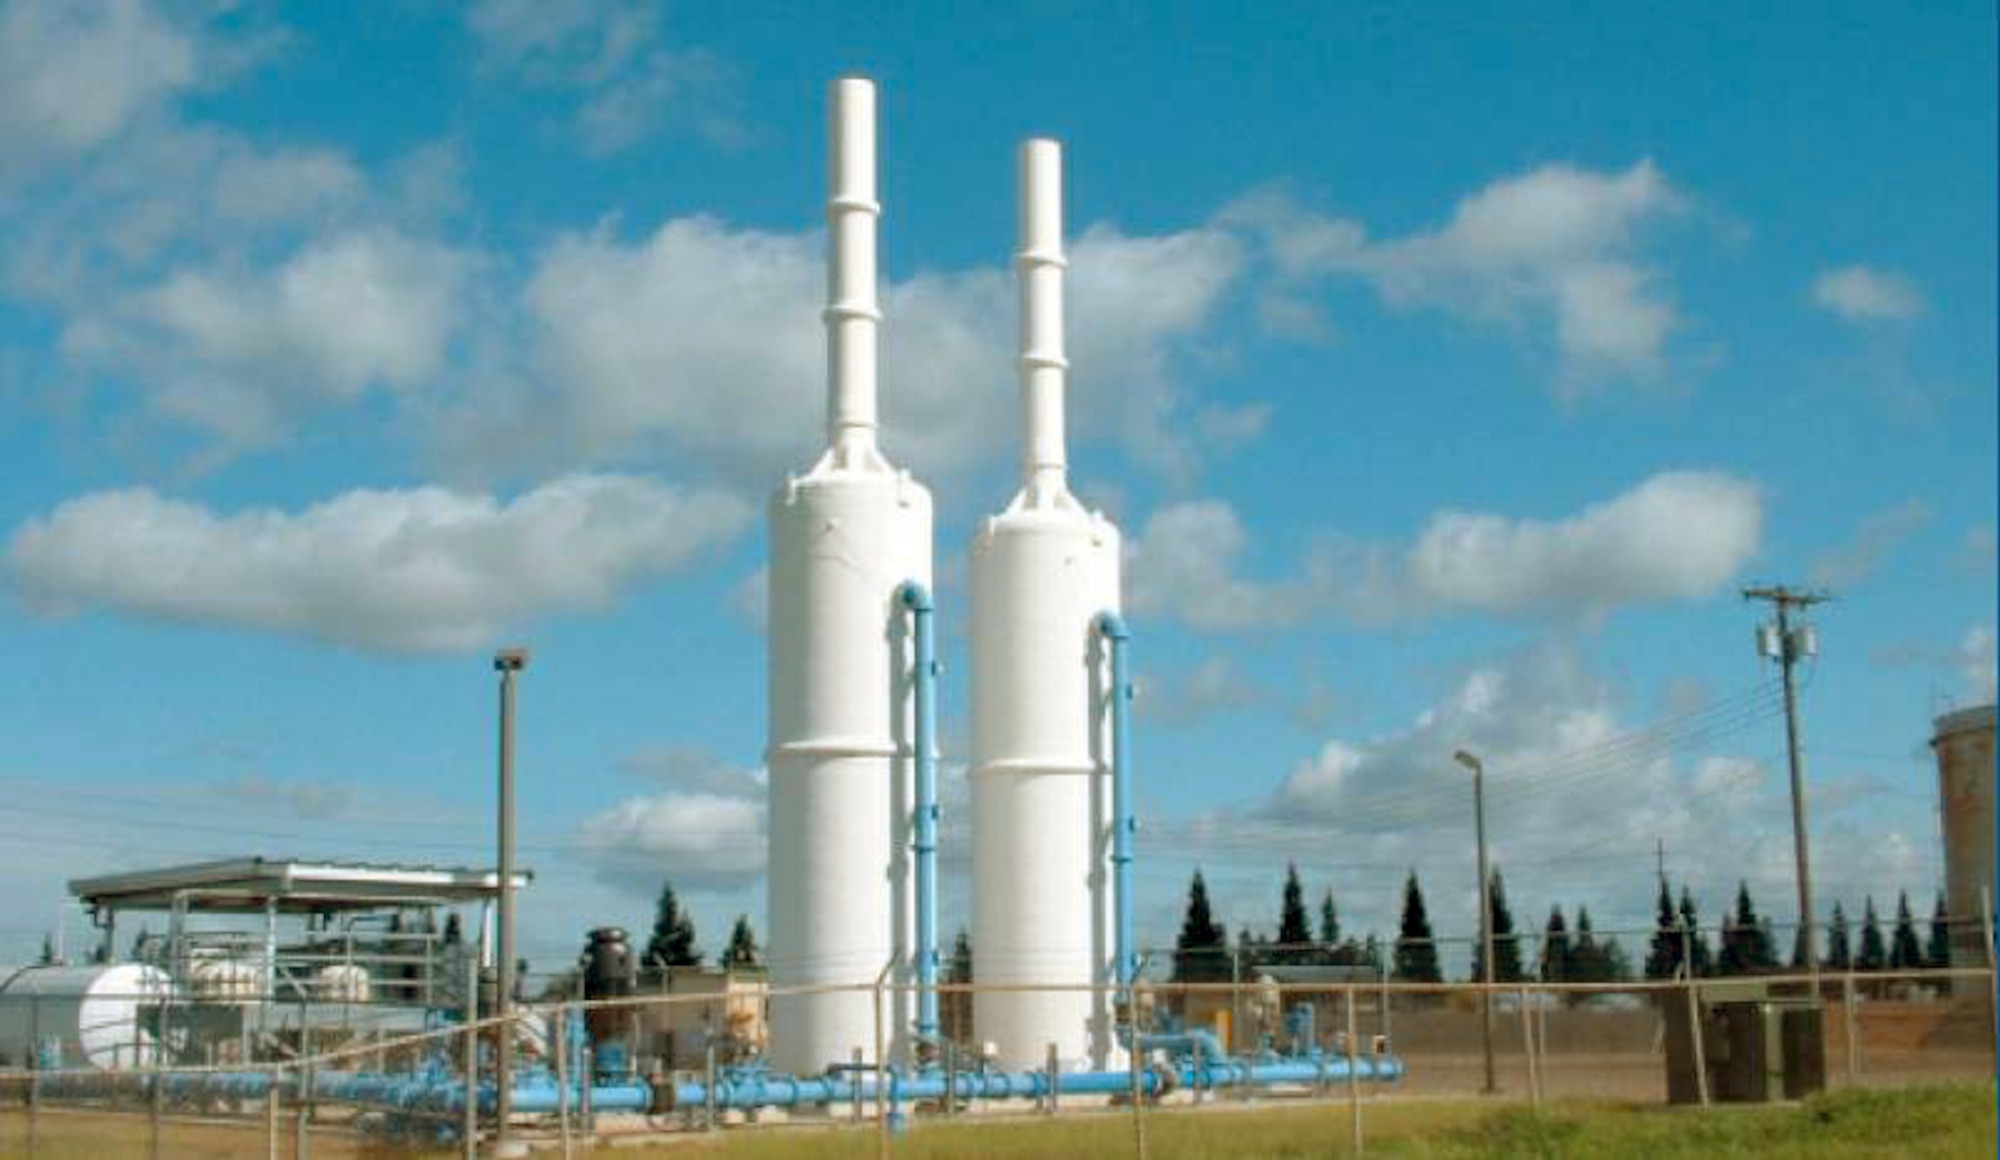 This groundwater treatment facillity removes chlorinated chemicals from the water extracted from beneath the former Mather Air Force Base in Rancho Cordova, Calif. (Courtesy photo)